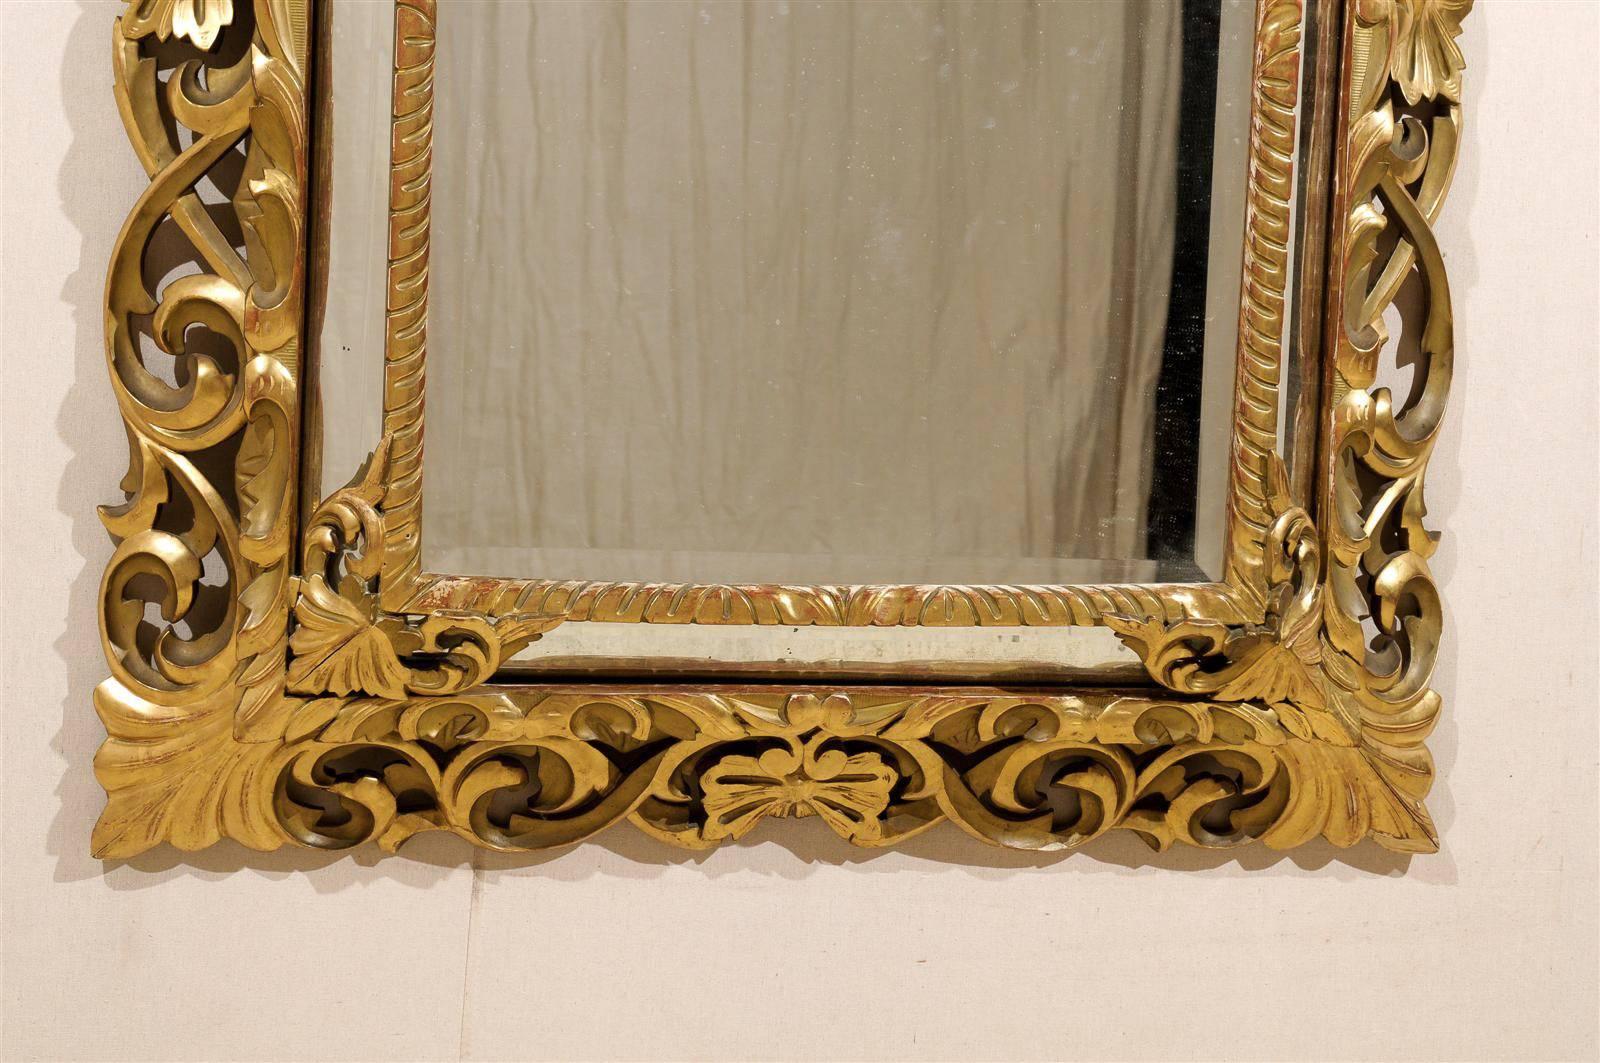 An Italian 19th Century Gilt Wood Mirror with Ornate Foliage Decor, Gold Color For Sale 4